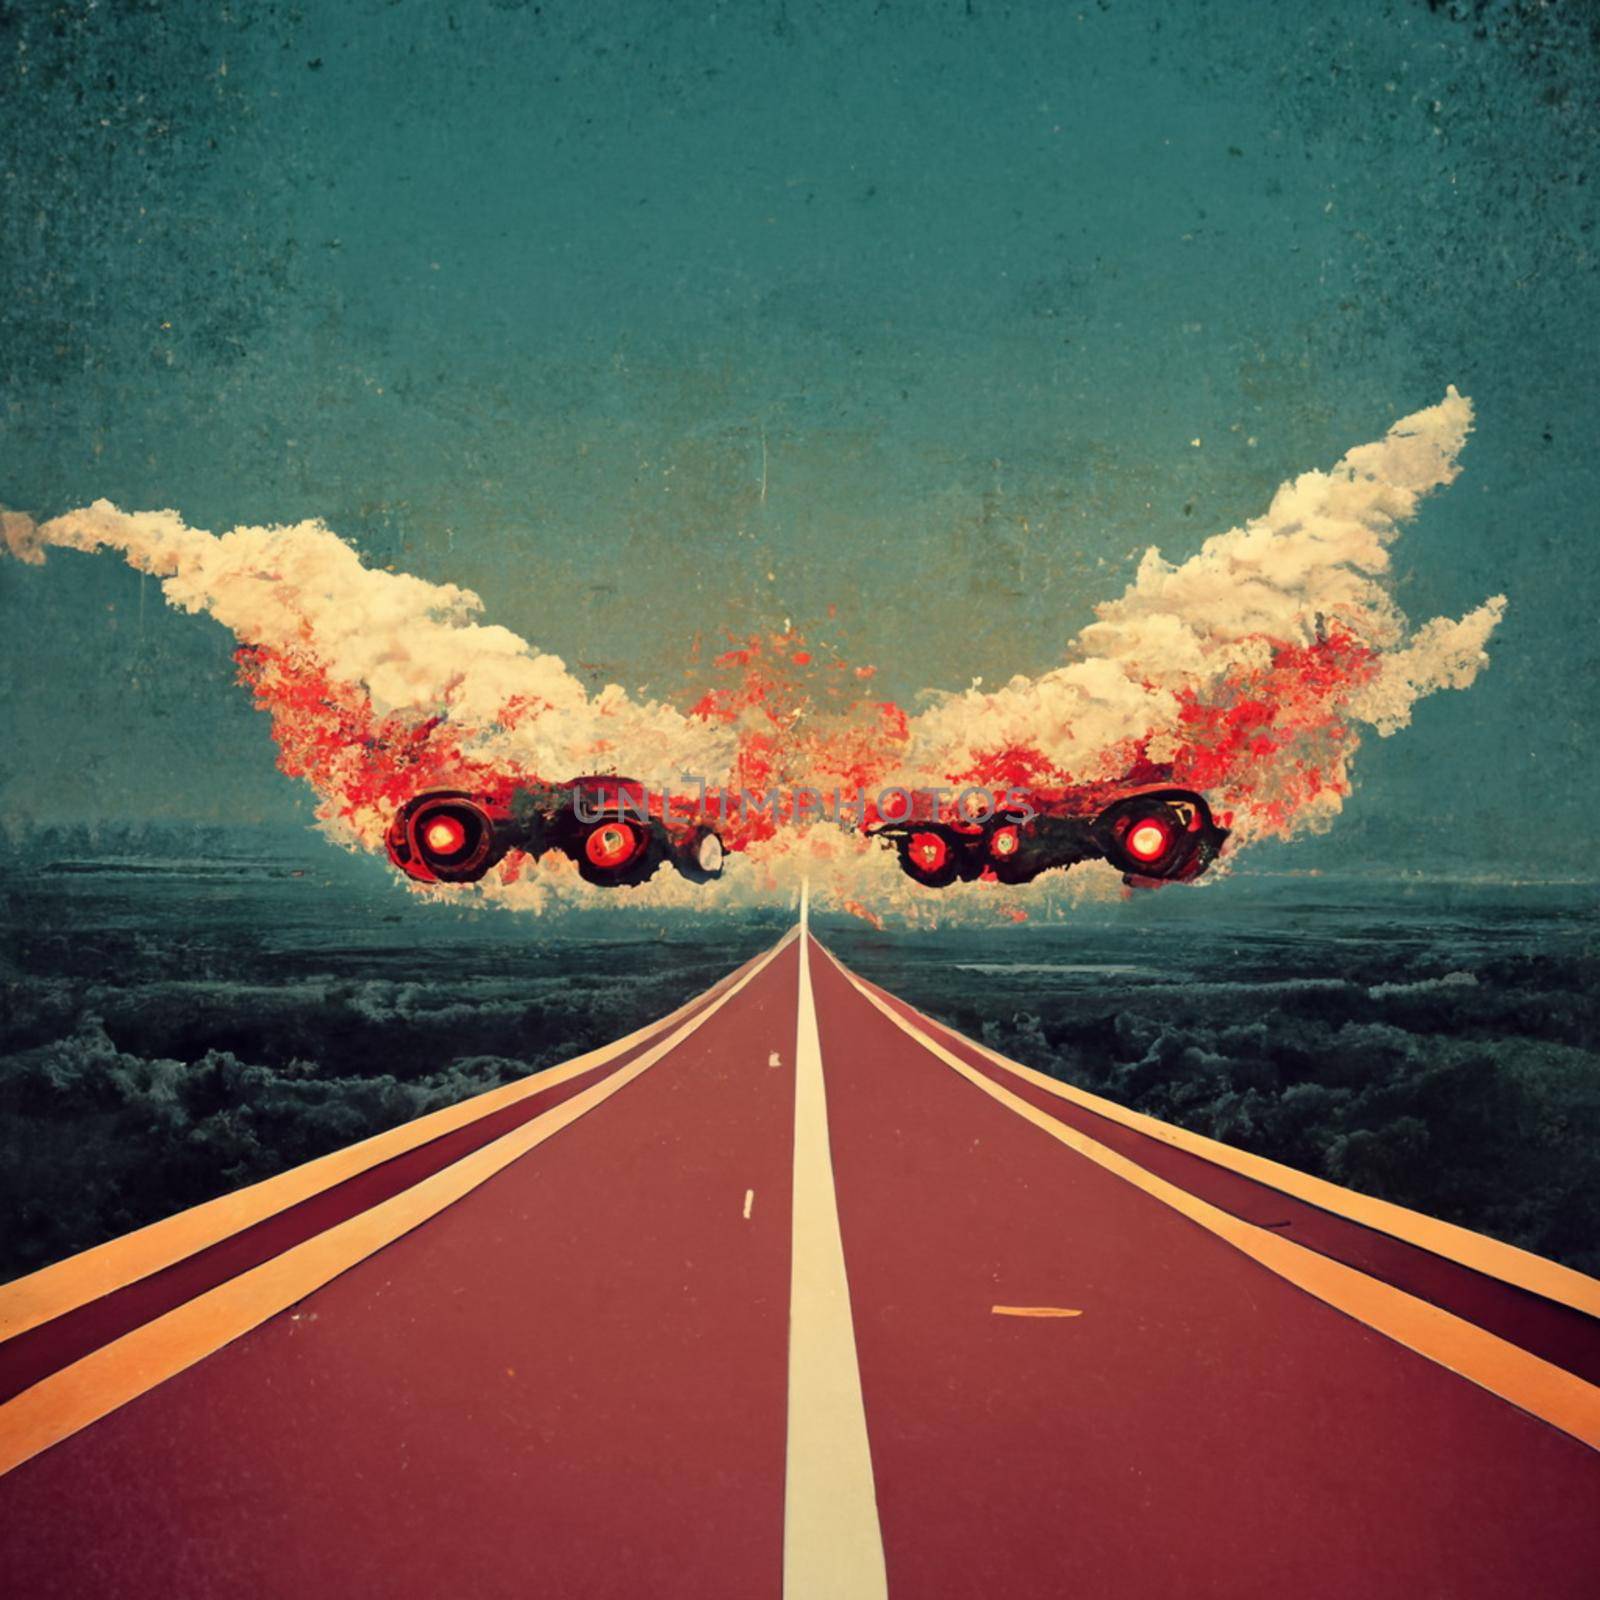 Highway to hell with flying cars by architectphd